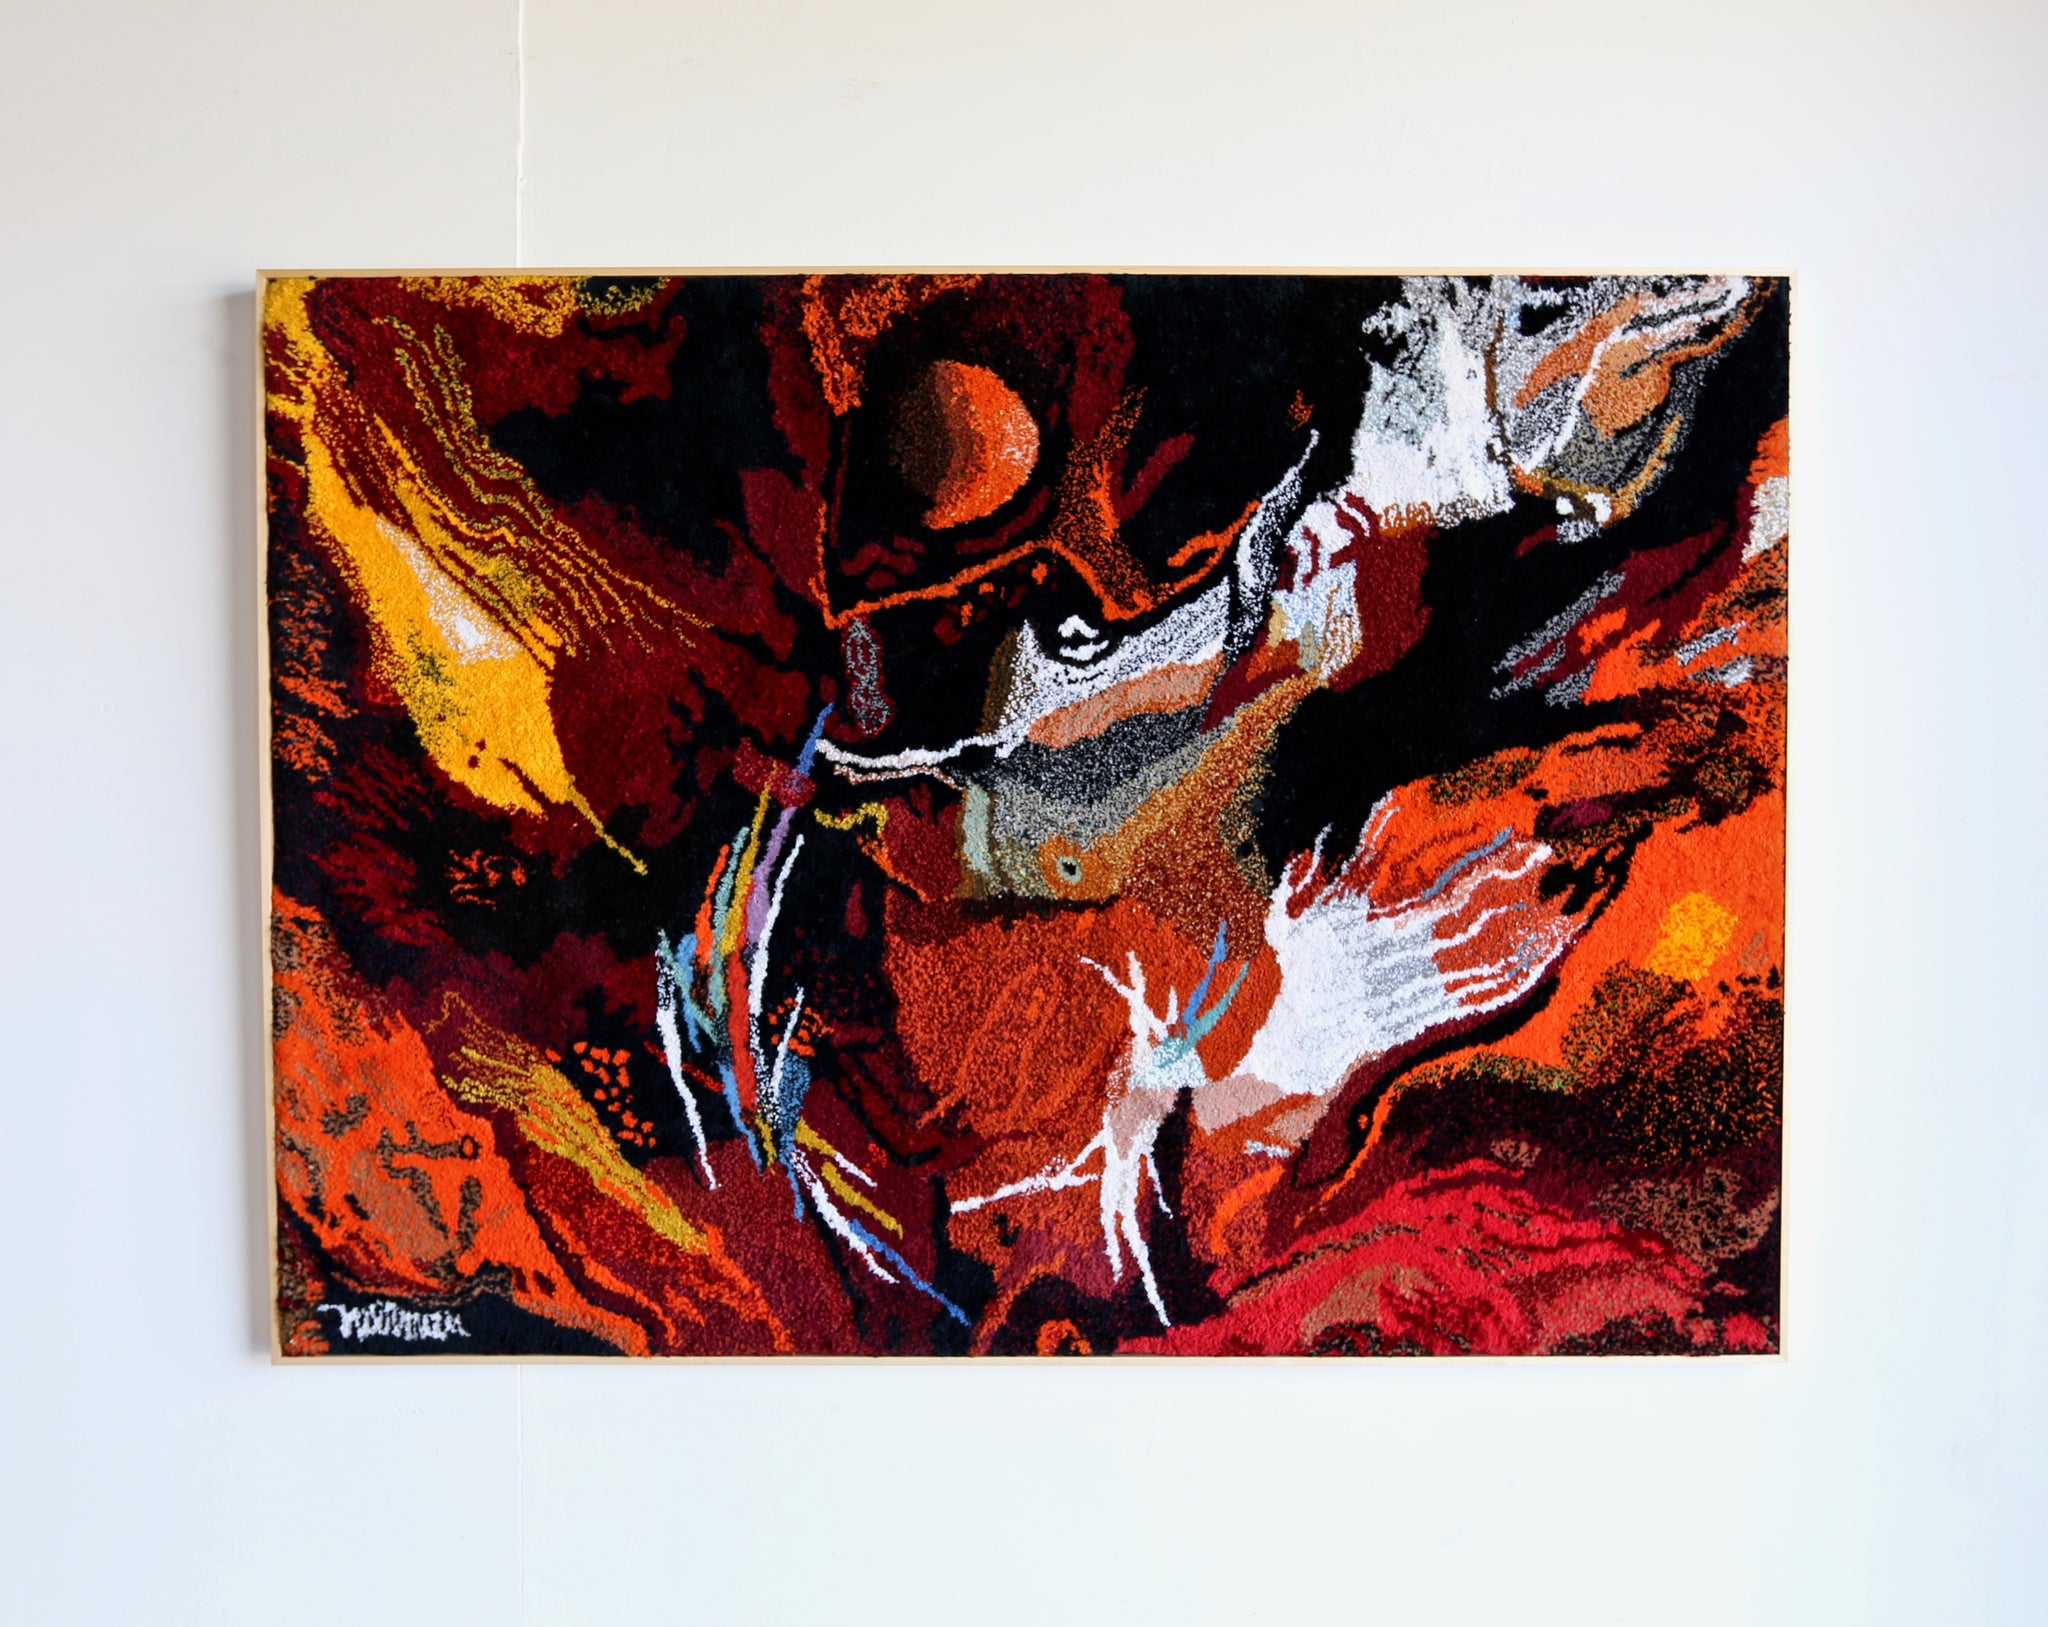 = SOLD = Leonardo Nierman Large Scale Abstract Tapestry circa 1965